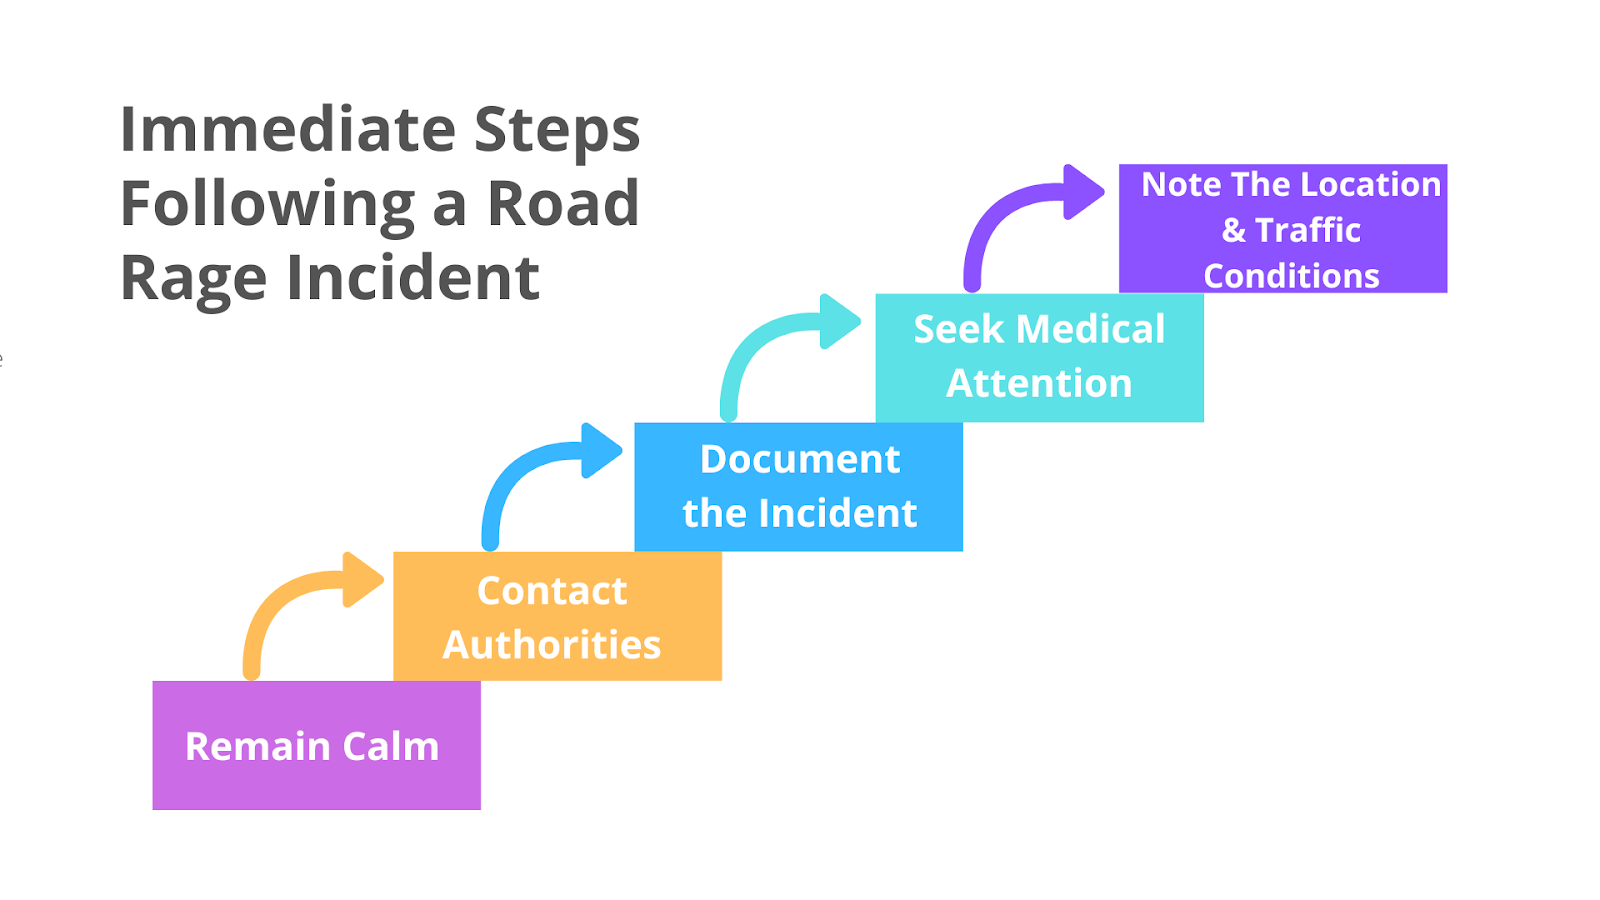 Immediate steps following a Road Rage Incident